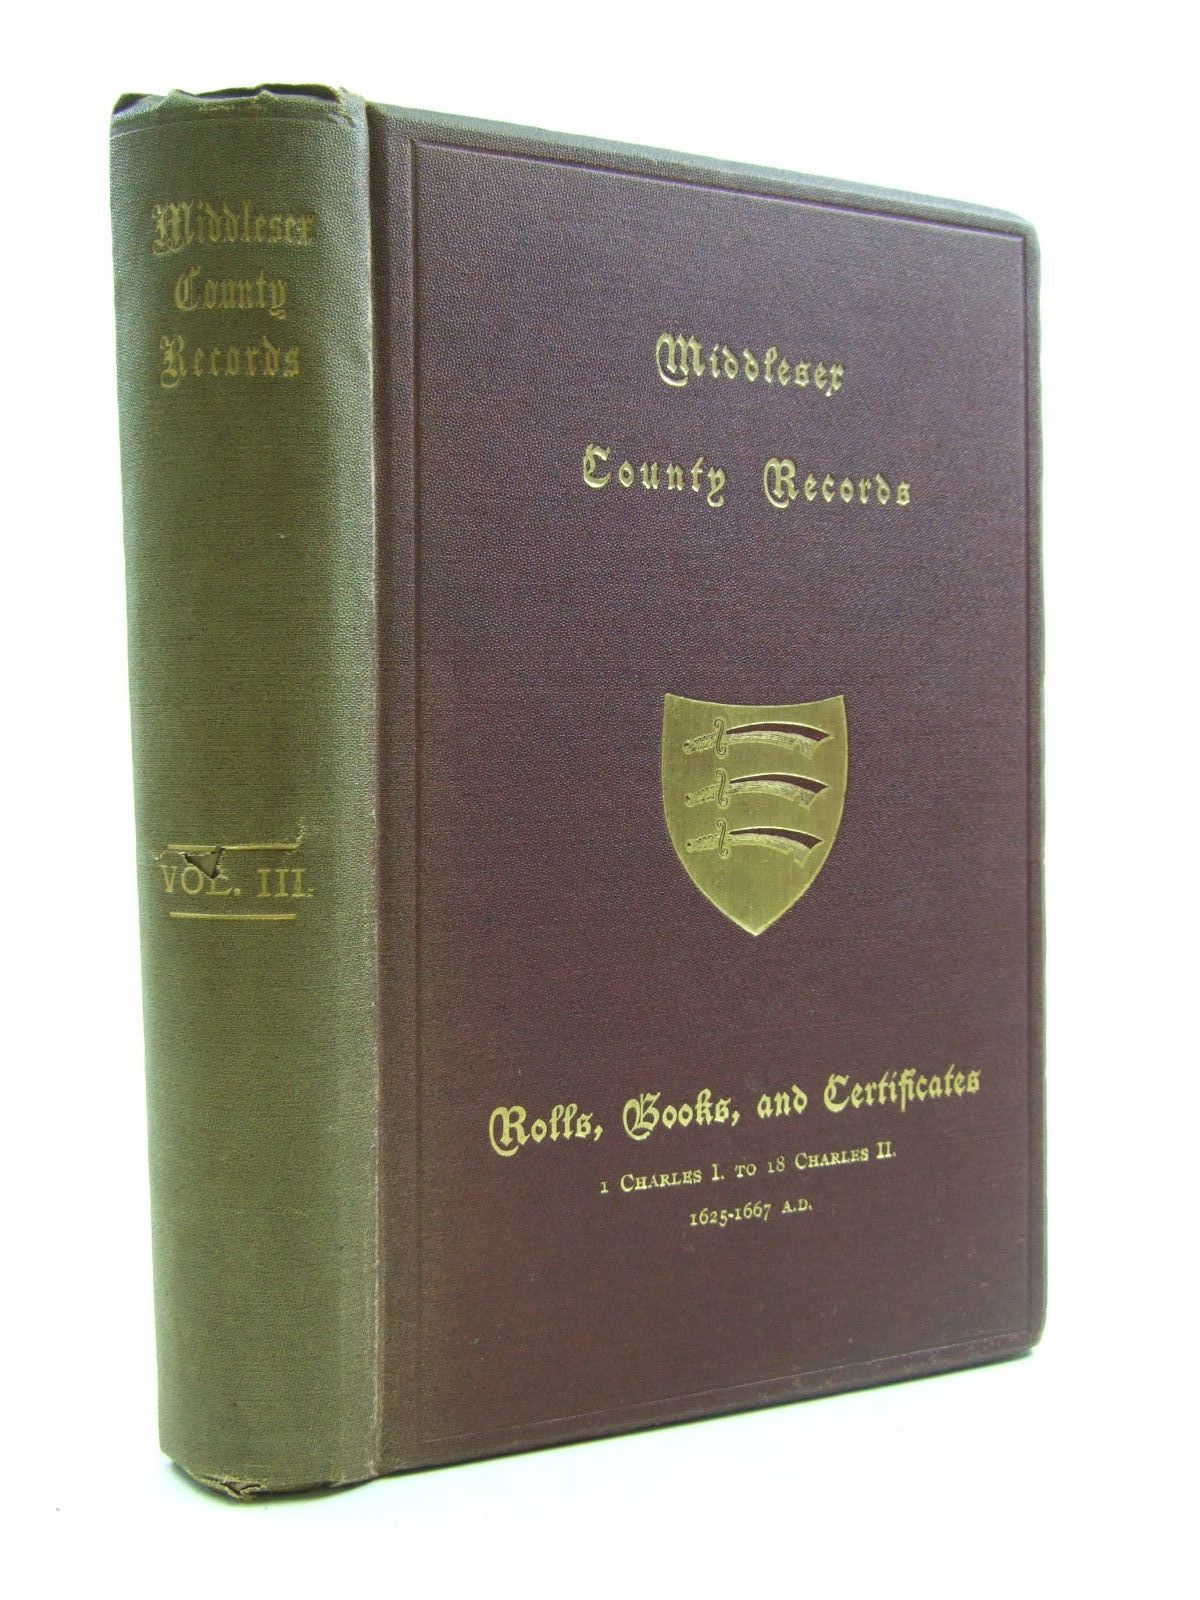 Photo of MIDDLESEX COUNTY RECORDS VOLUME III written by Jeaffreson, J.C. published by The Middlesex County Record Society (STOCK CODE: 1207506)  for sale by Stella & Rose's Books